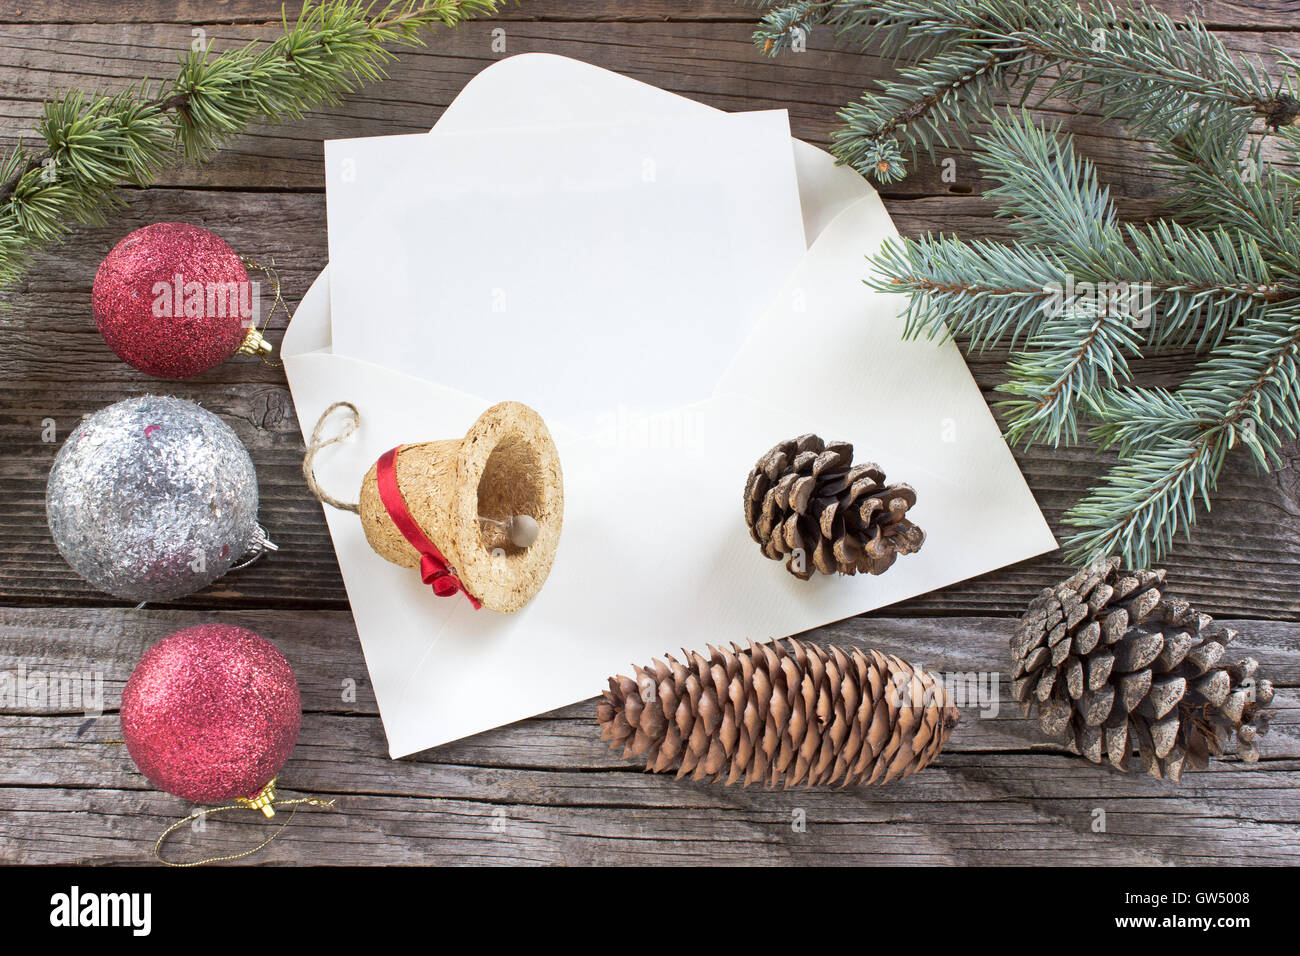 Pine cones, needles and Christmas balls on wooden background Stock Photo